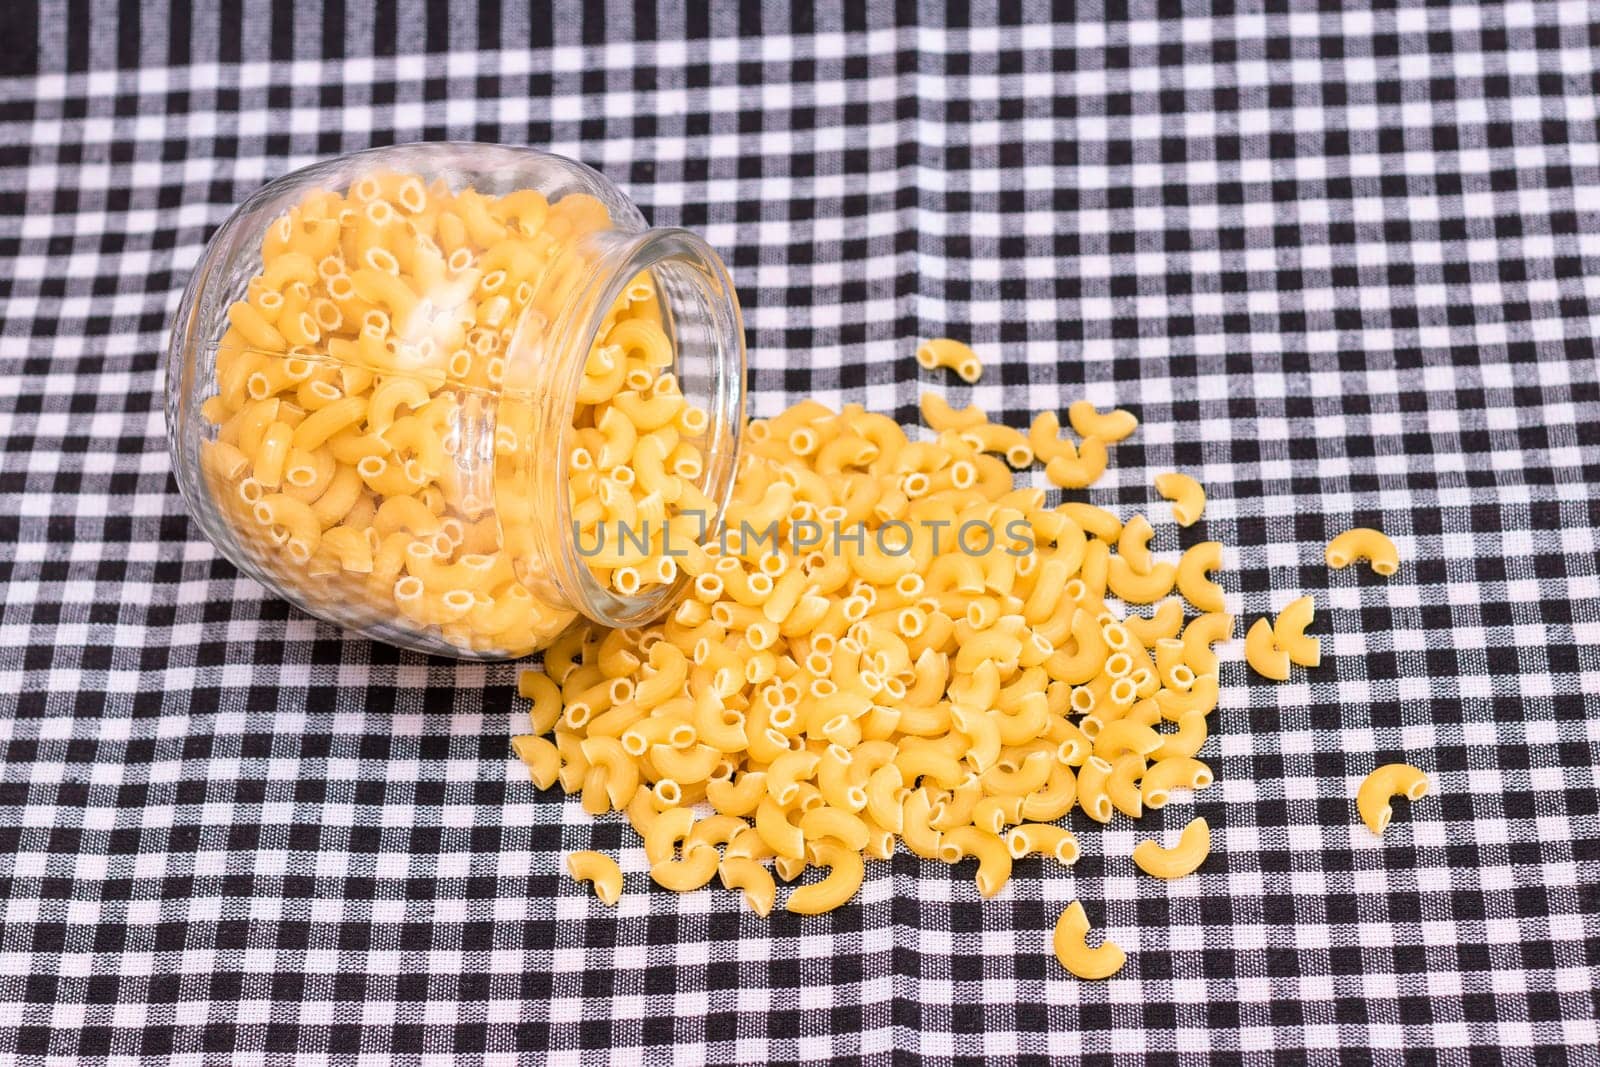 Scattered Uncooked Chifferi Rigati Pasta on Black Checkered Towel. Fat and Unhealthy Food. Classic Dry Macaroni. Italian Culture and Cuisine. Raw Pasta